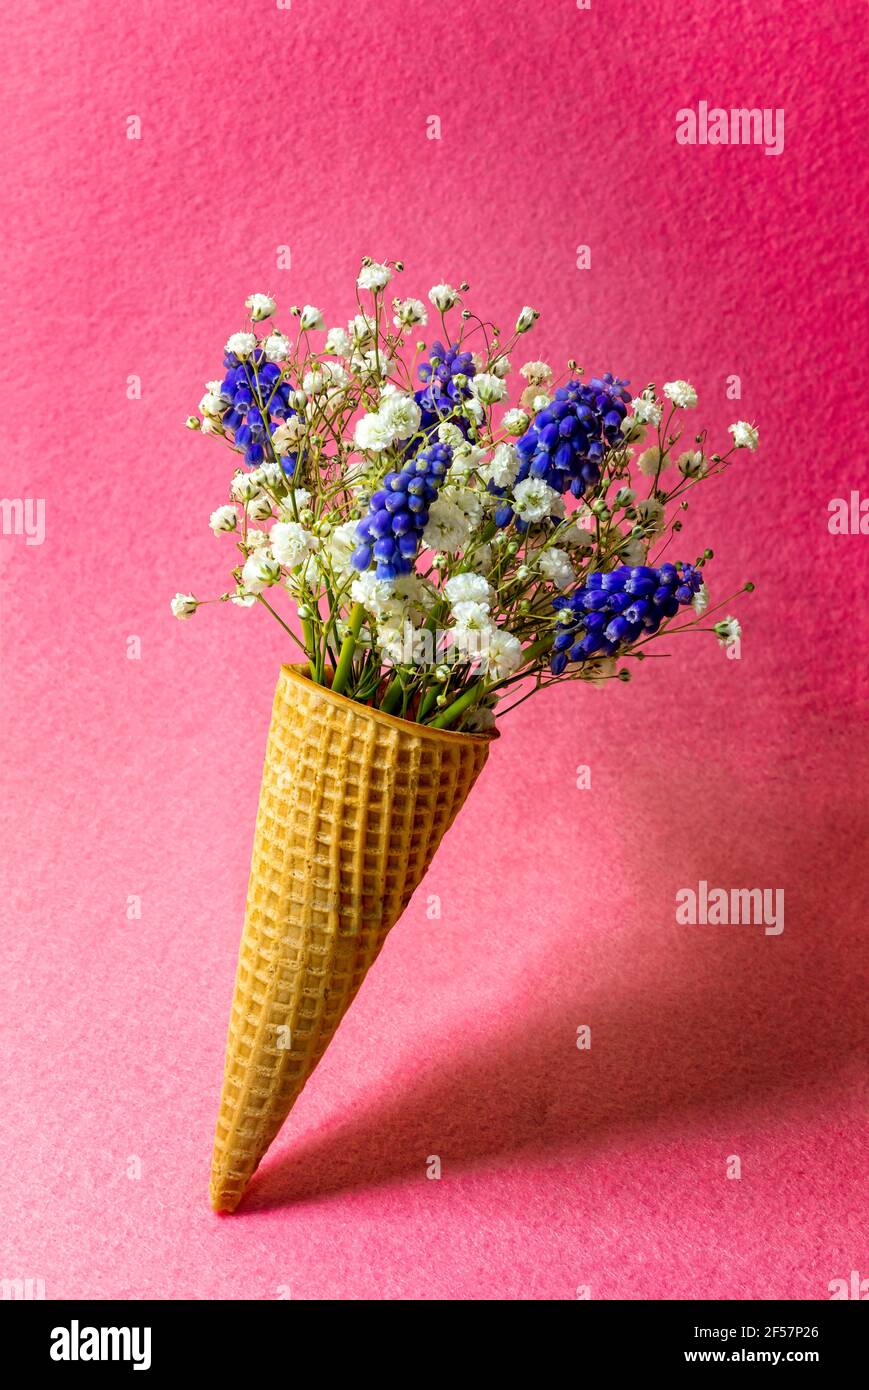 Ice cream cone with flowers on pink background. Side view, copy space, spring flowers concept Stock Photo